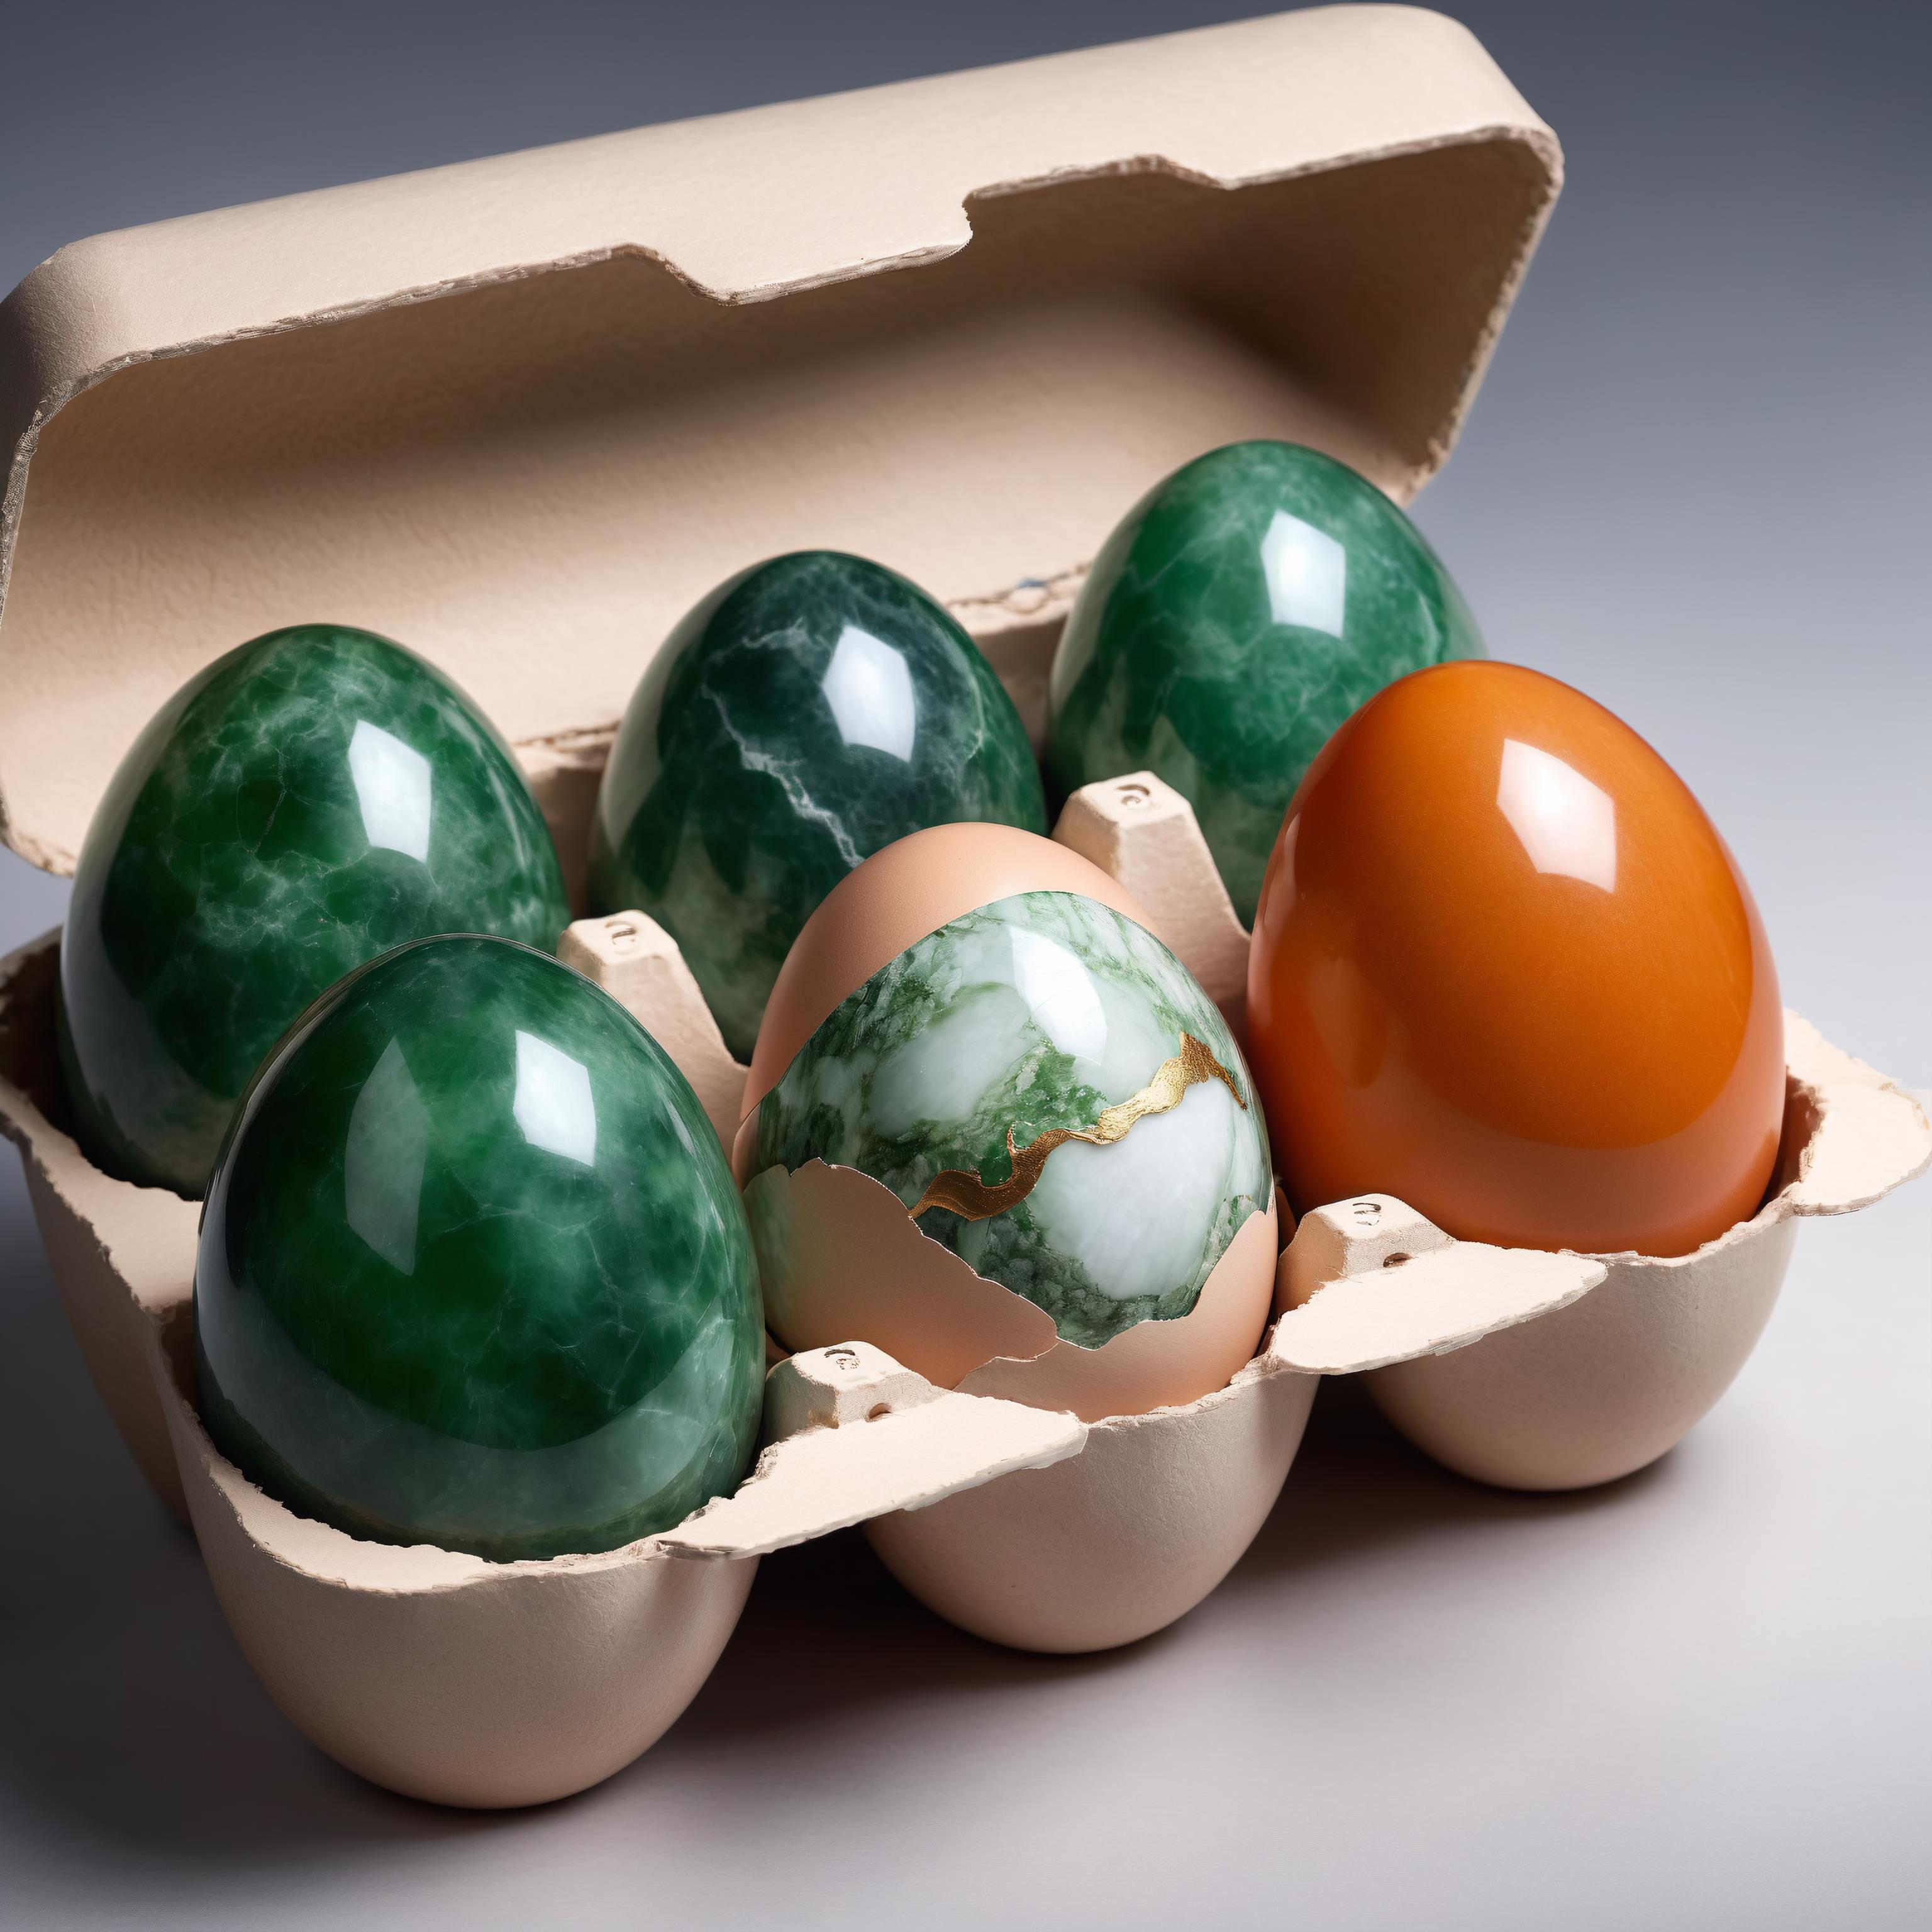 A carton of six different colored eggs, including a green egg, an orange egg, and a brown egg.